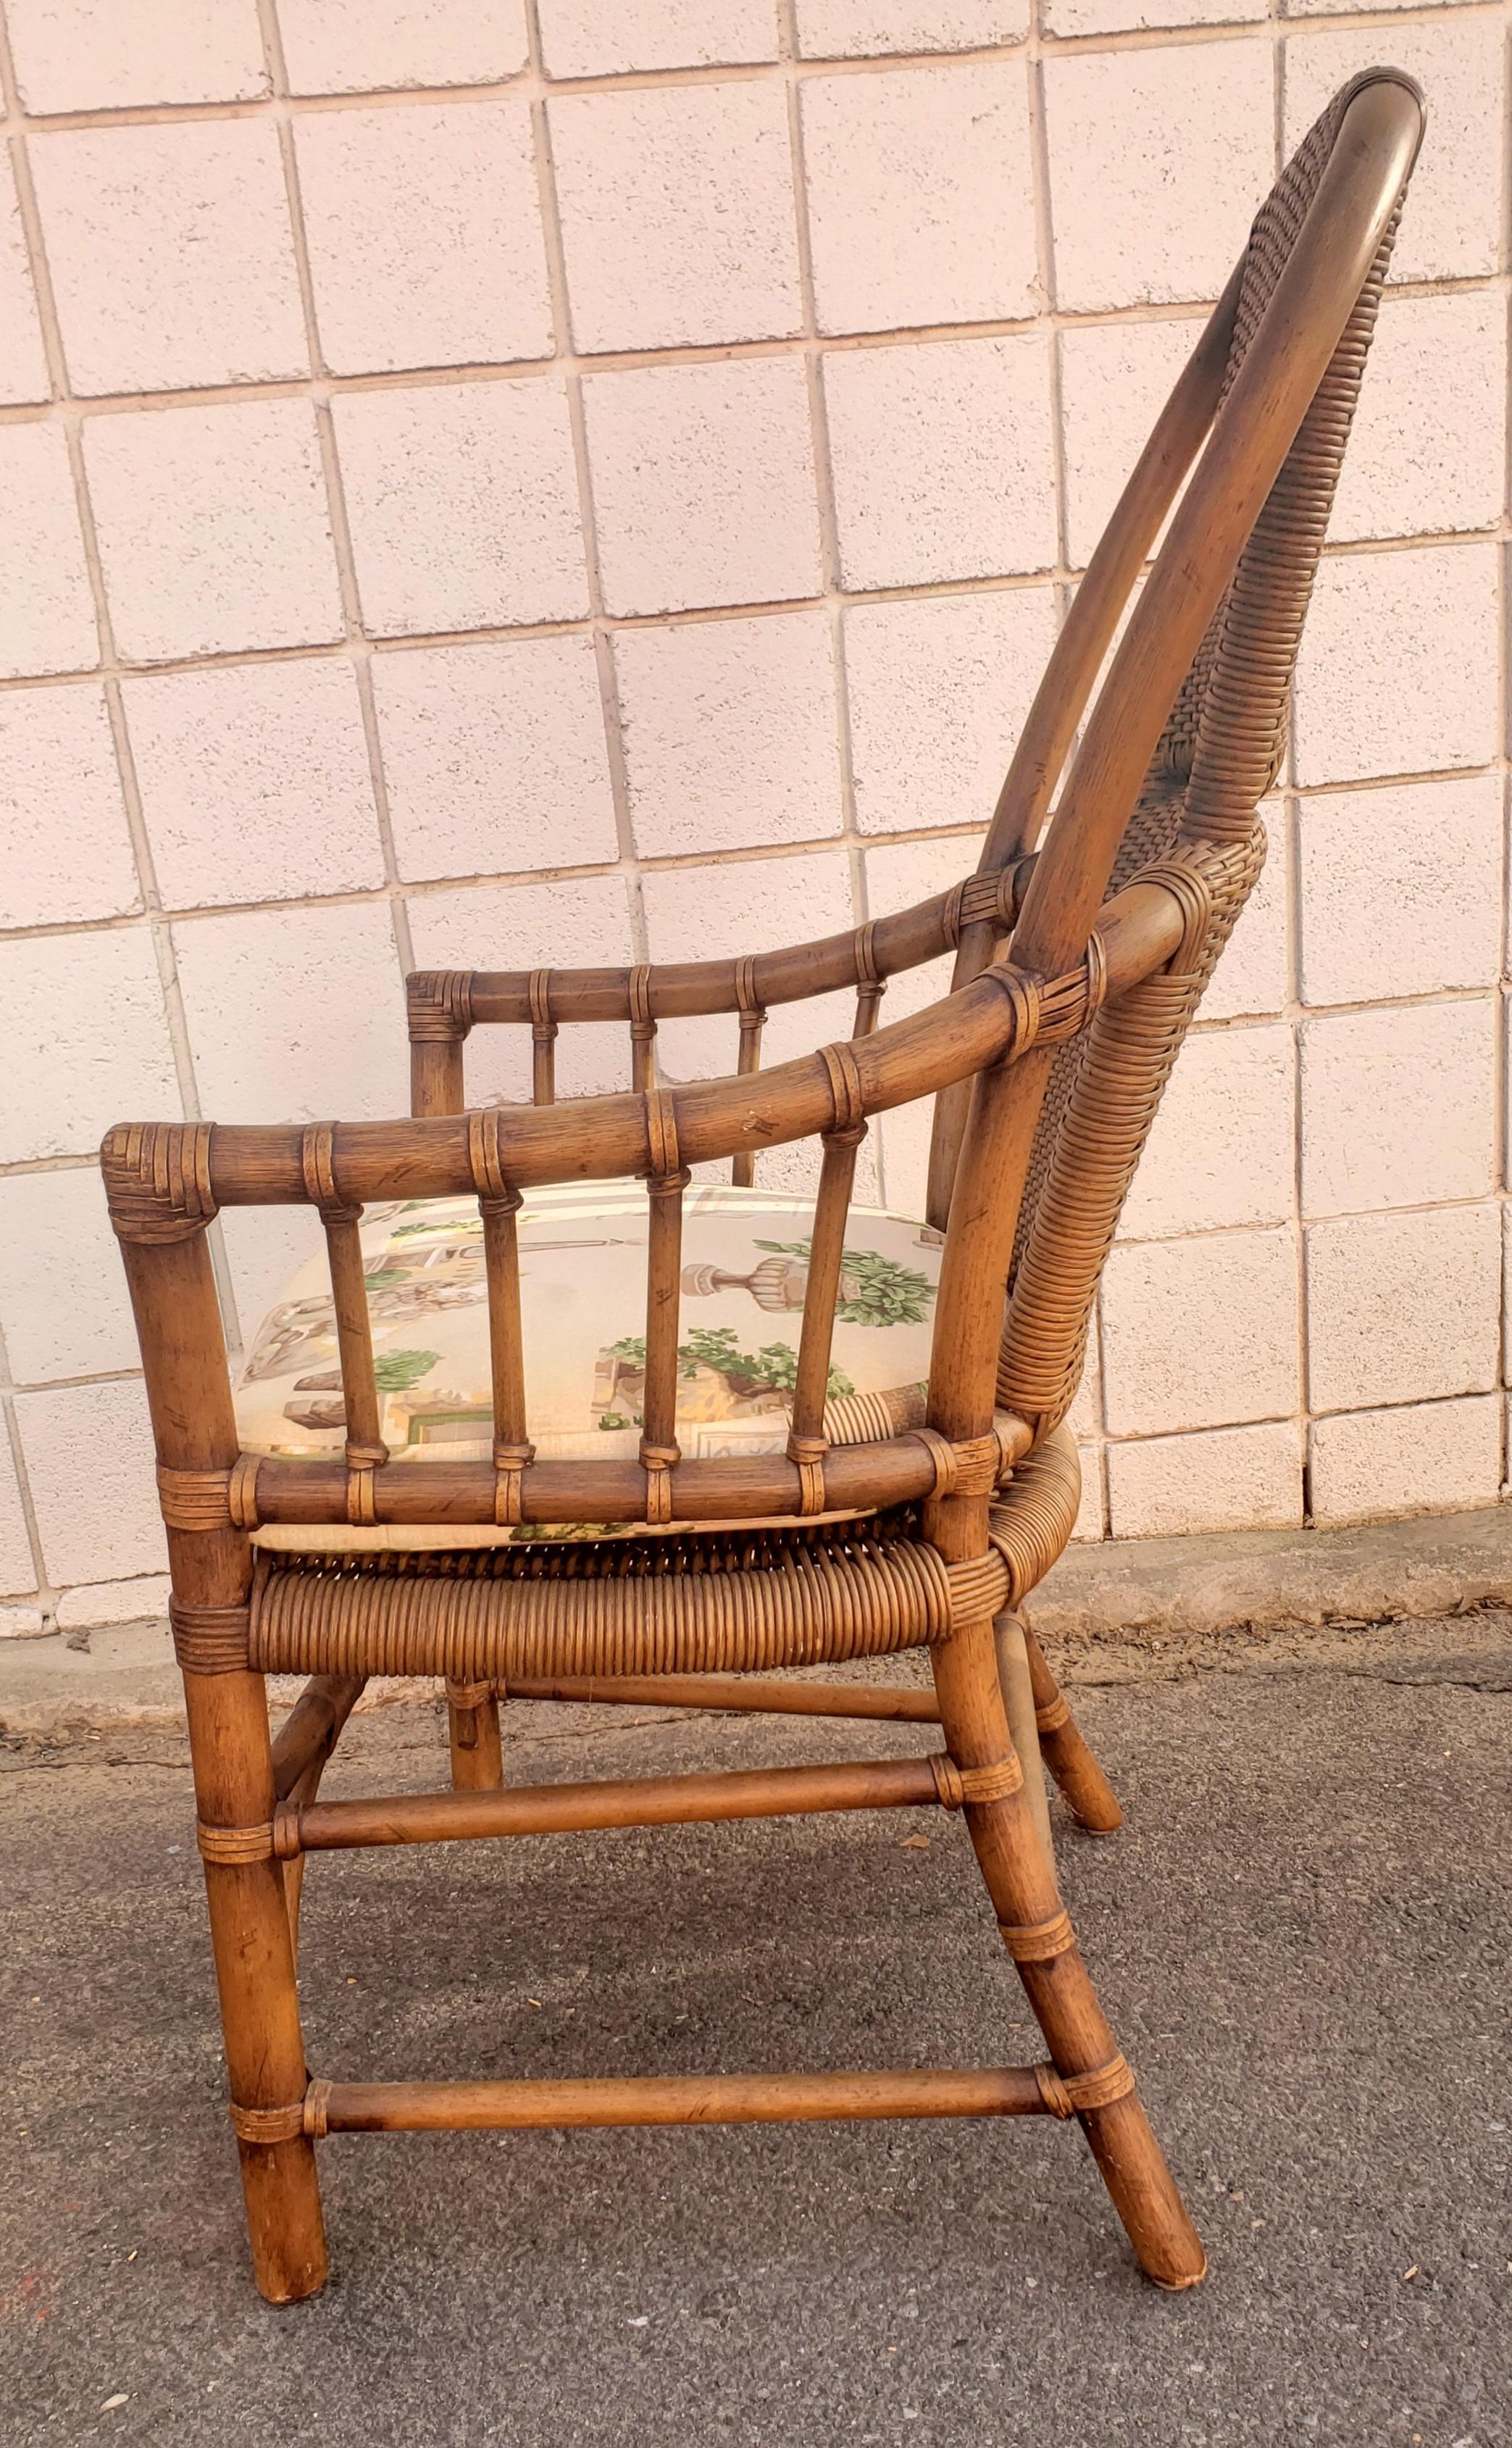 1970s High Hoop Back Rattan and Leather Straps Arm Chairs, a Pair In Good Condition For Sale In Germantown, MD